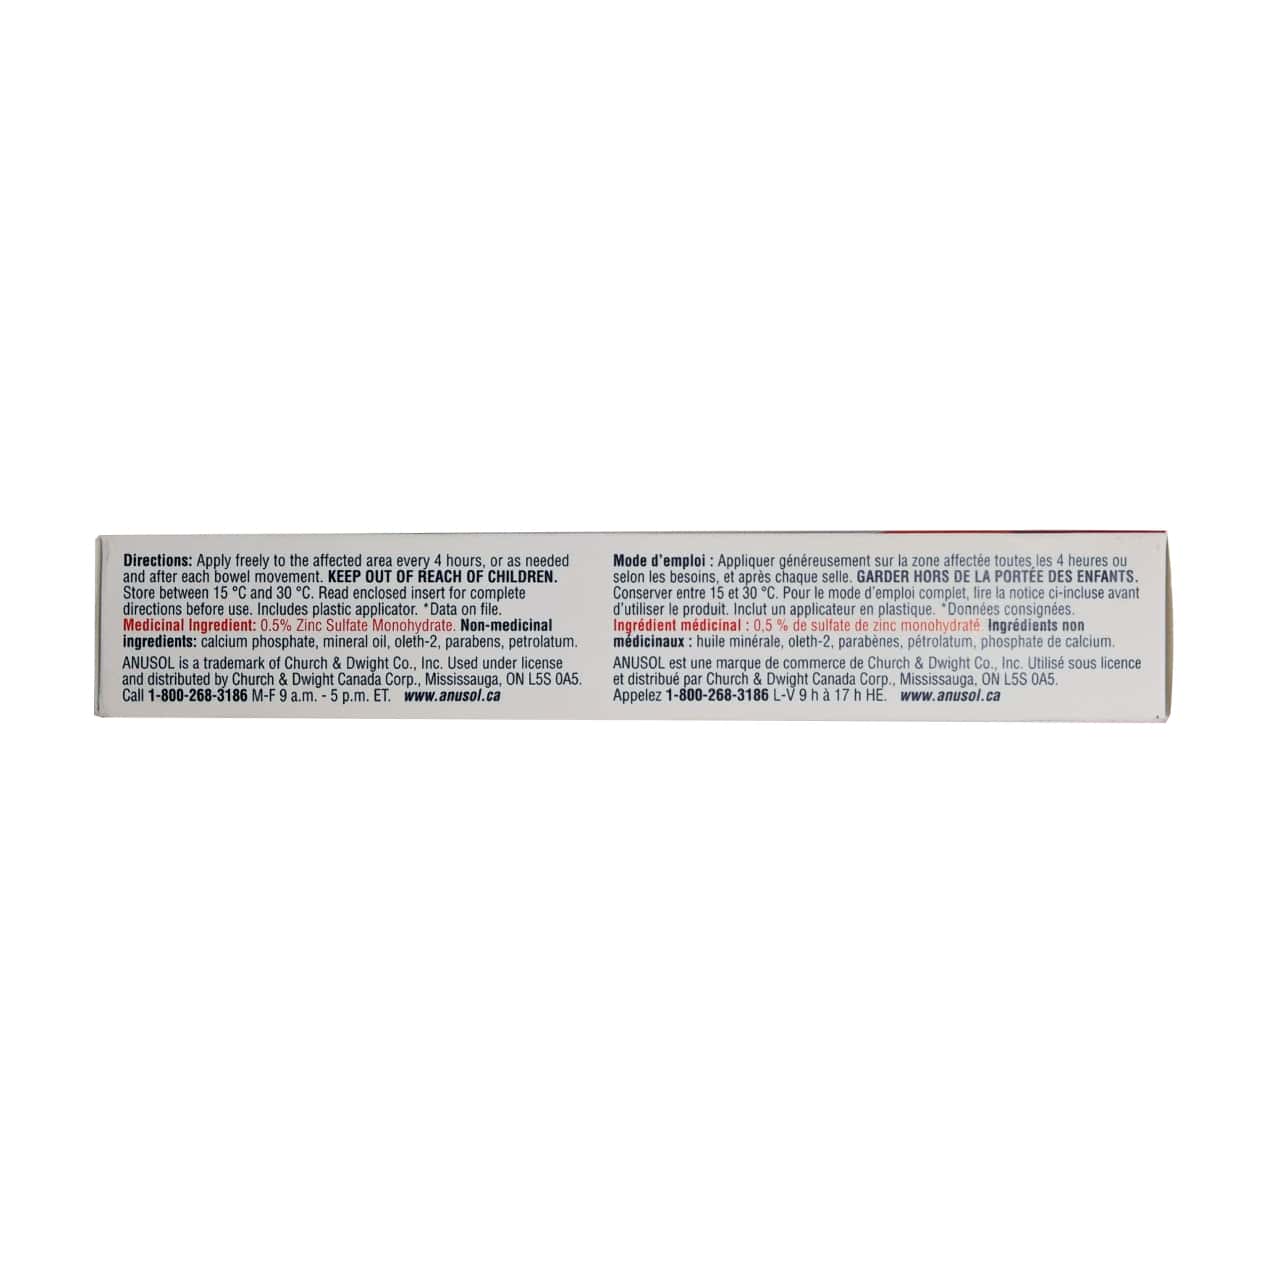 Product details, directions, ingredients, and warnings for Anusol Multi-Symptom Hemorrhoidal Ointment in French and English